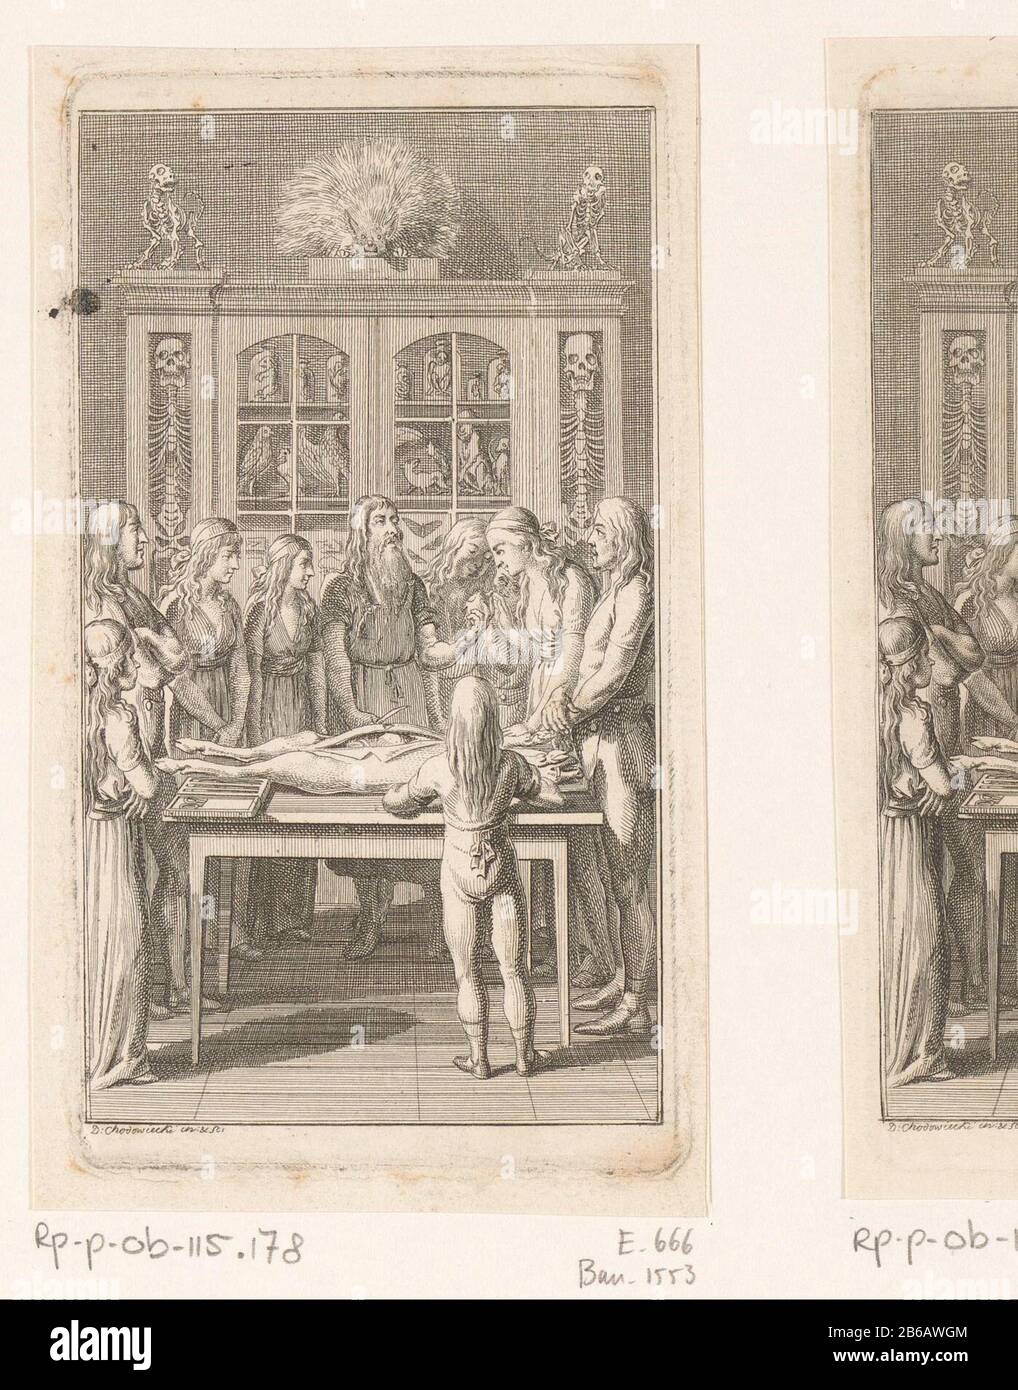 Anatomical les Anatomical les Object Type : picture Item number: RP-P-OB-115.178Catalogusreferentie Bauer 1553Engelmann 666Collectie Rijksmuseum 1 (2) Markings / Brands: collector's mark, verso, stamped: Lugt 2228 Manufacturer : printmaker Daniel Nikolaus ChodoWie: CKI (listed building) in its design: Daniel Nikolaus Chodowiecki (listed property) Place manufacture: Berlin Date: 1791 Physical features: etching; proofing material: paper Technique: etching dimensions: plate edge: h × 133 mm b 72 mmToelichtingPrent used for: Ziegenhagen, Franz Heir Nicholson. Lehre von dem richtigen Verhältnis zu Stock Photo